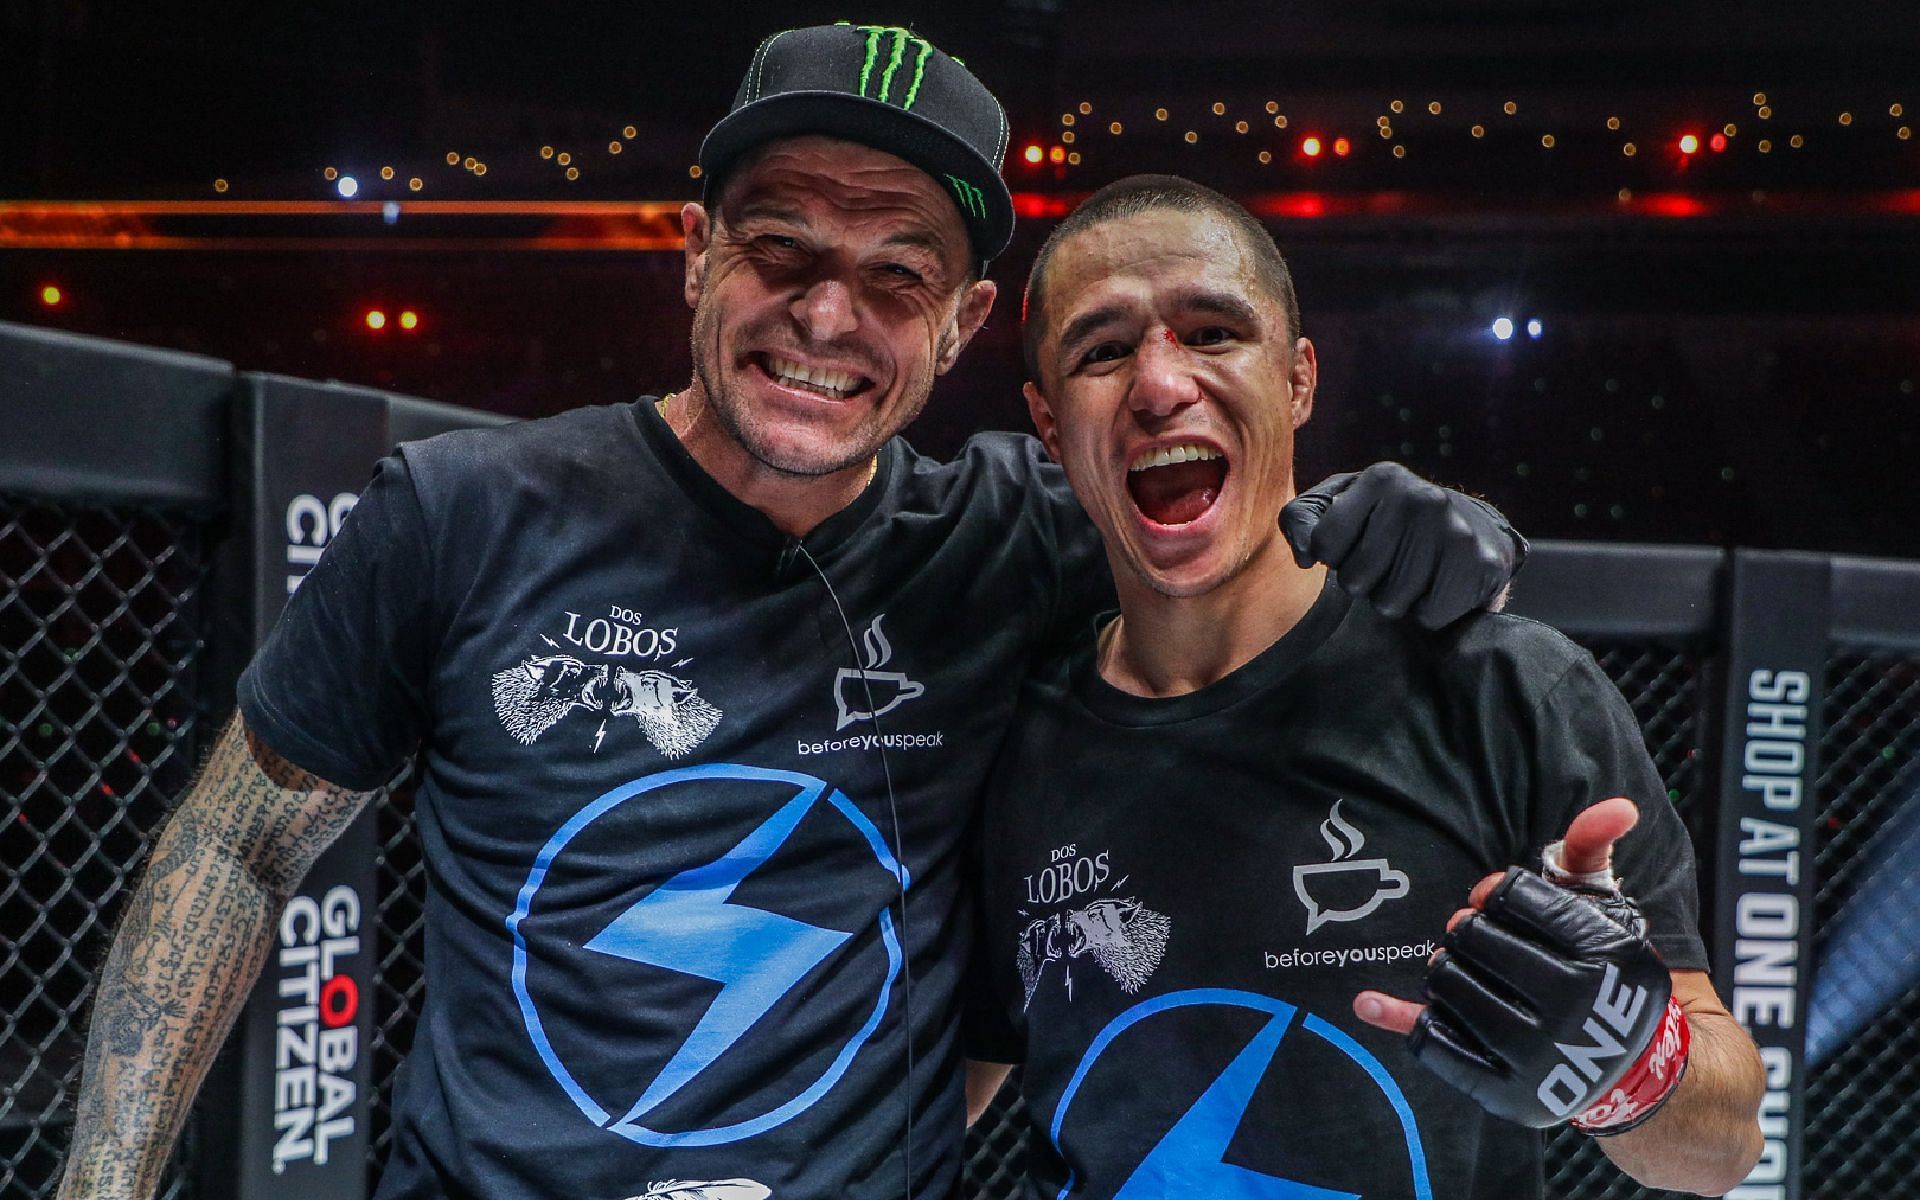 John Wayne Parr (left) and Reece McLaren (right) celebrate after the latter&#039;s victory at ONE 158. [Photo ONE Championship]